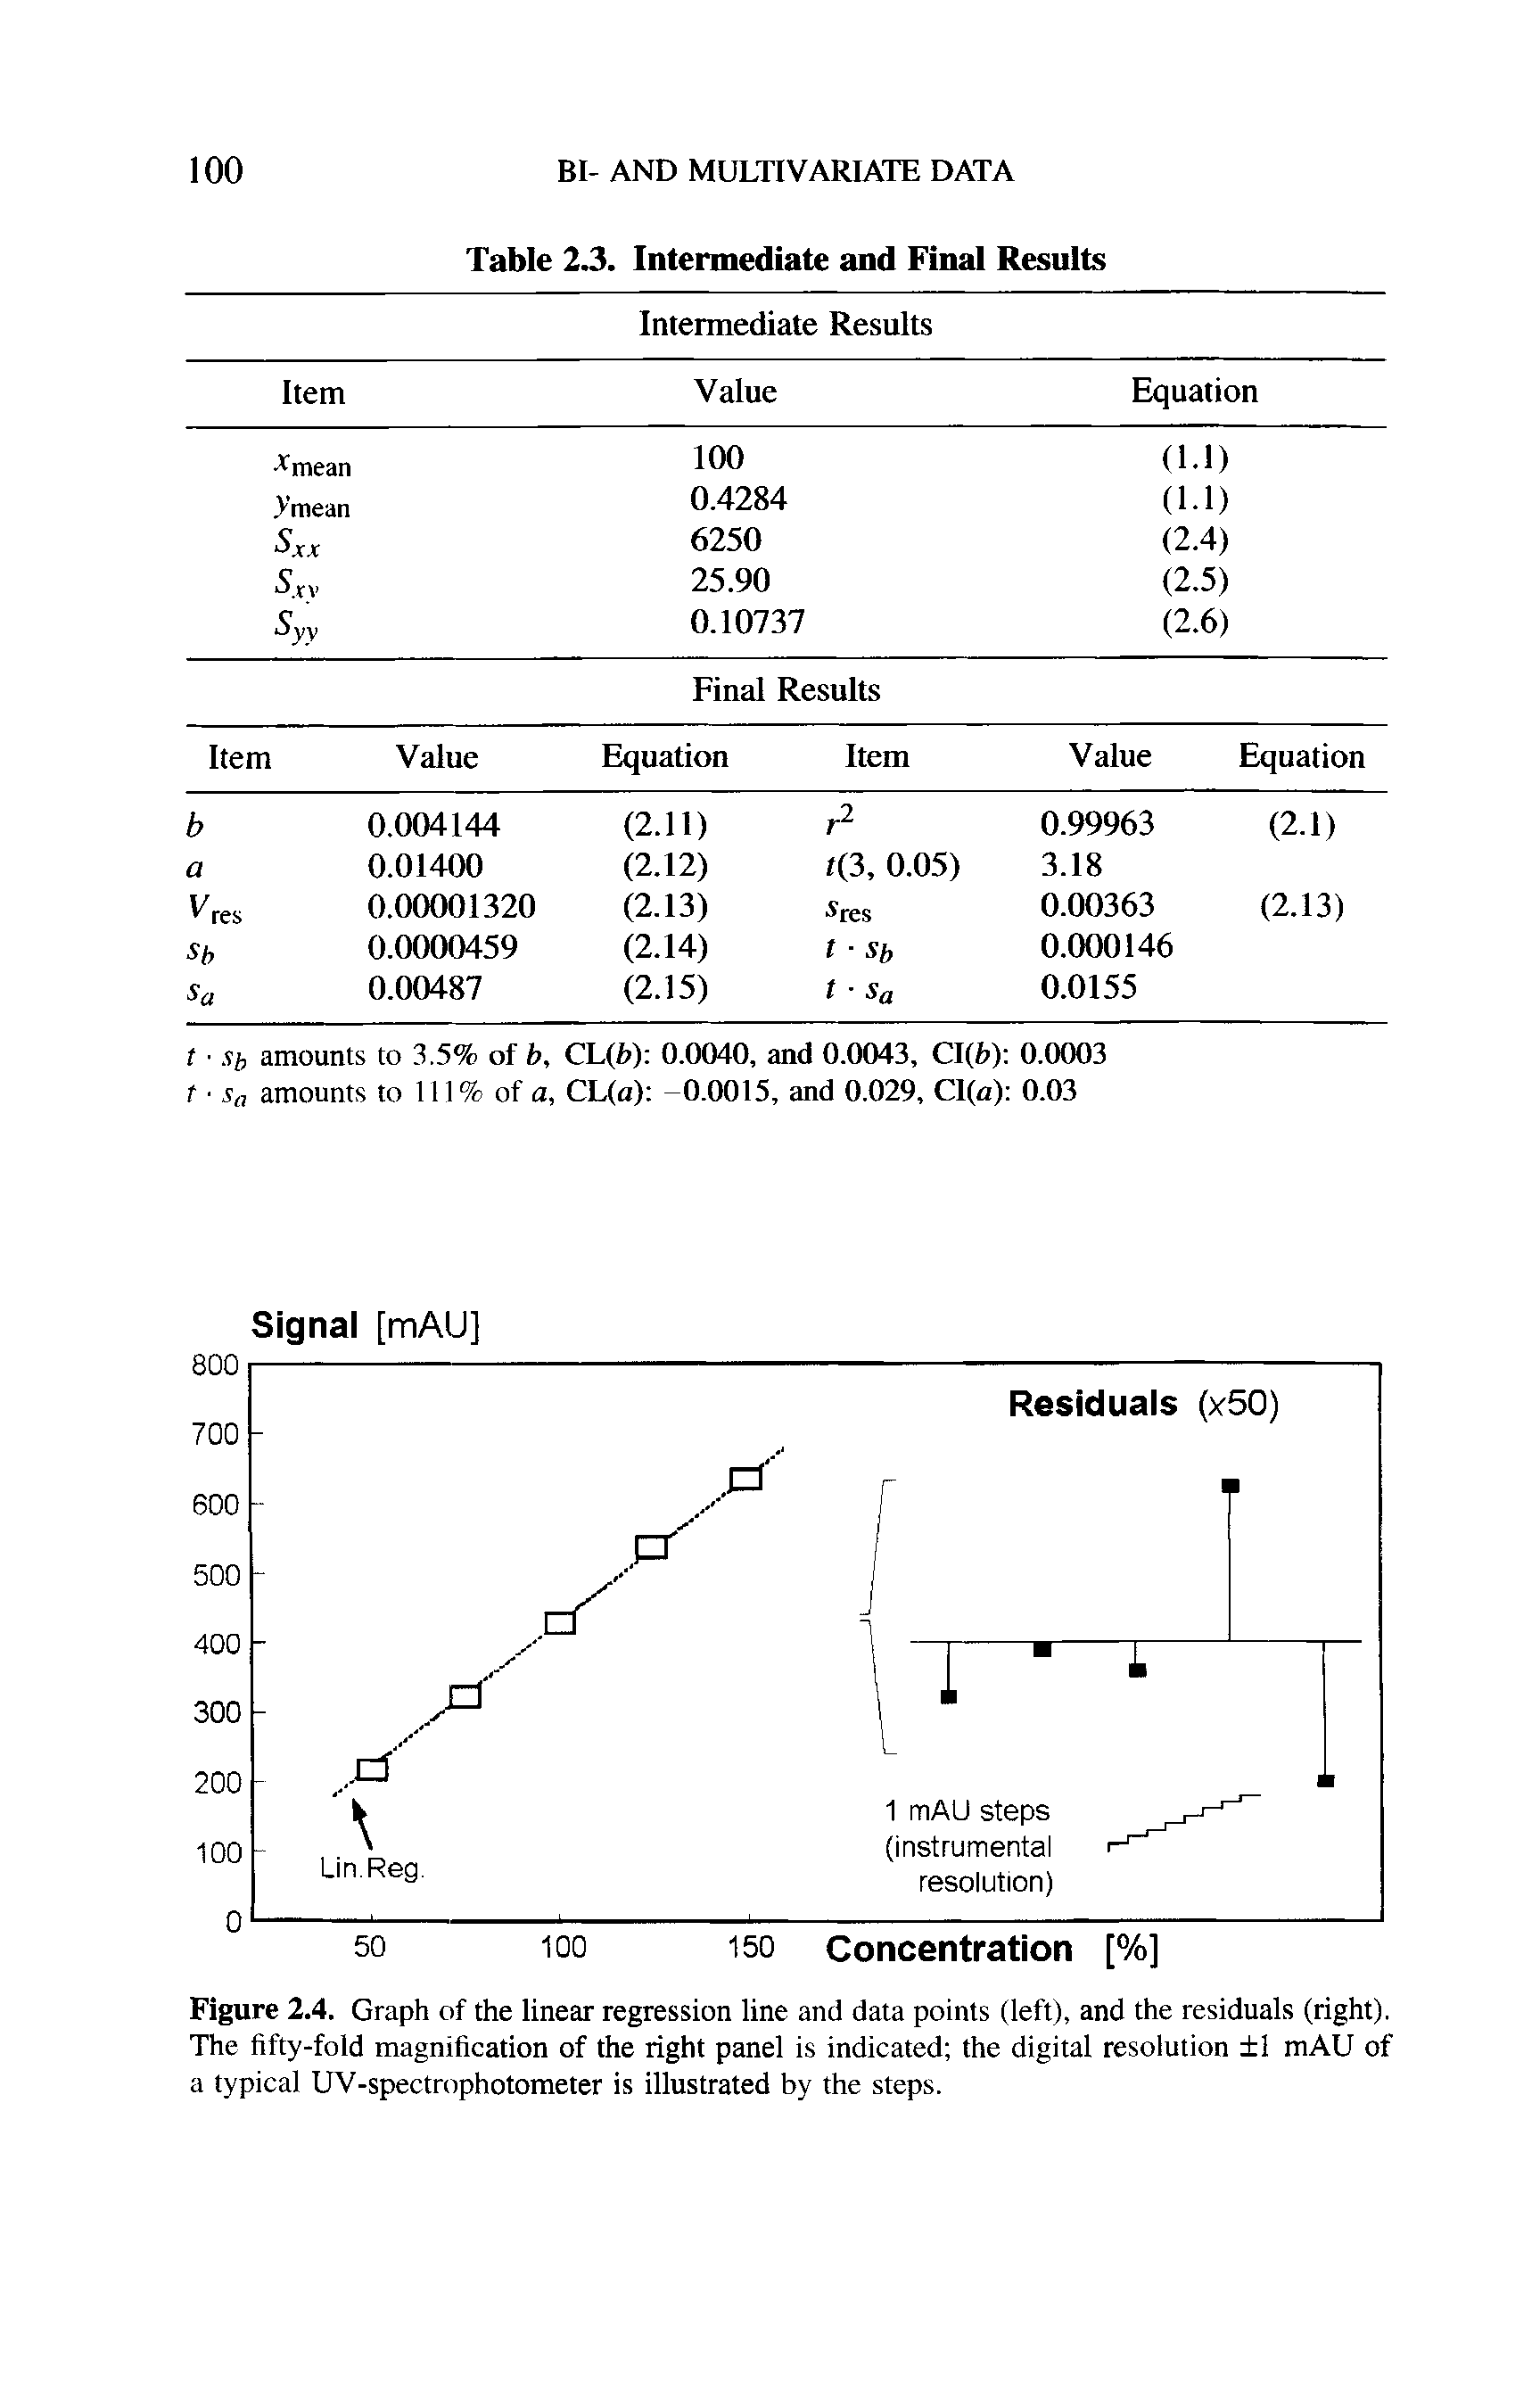 Figure 2.4. Graph of the linear regression line and data points (left), and the residuals (right). The fifty-fold magnification of the right panel is indicated the digital resolution 1 mAU of a typical UV-spectrophotometer is illustrated by the steps.